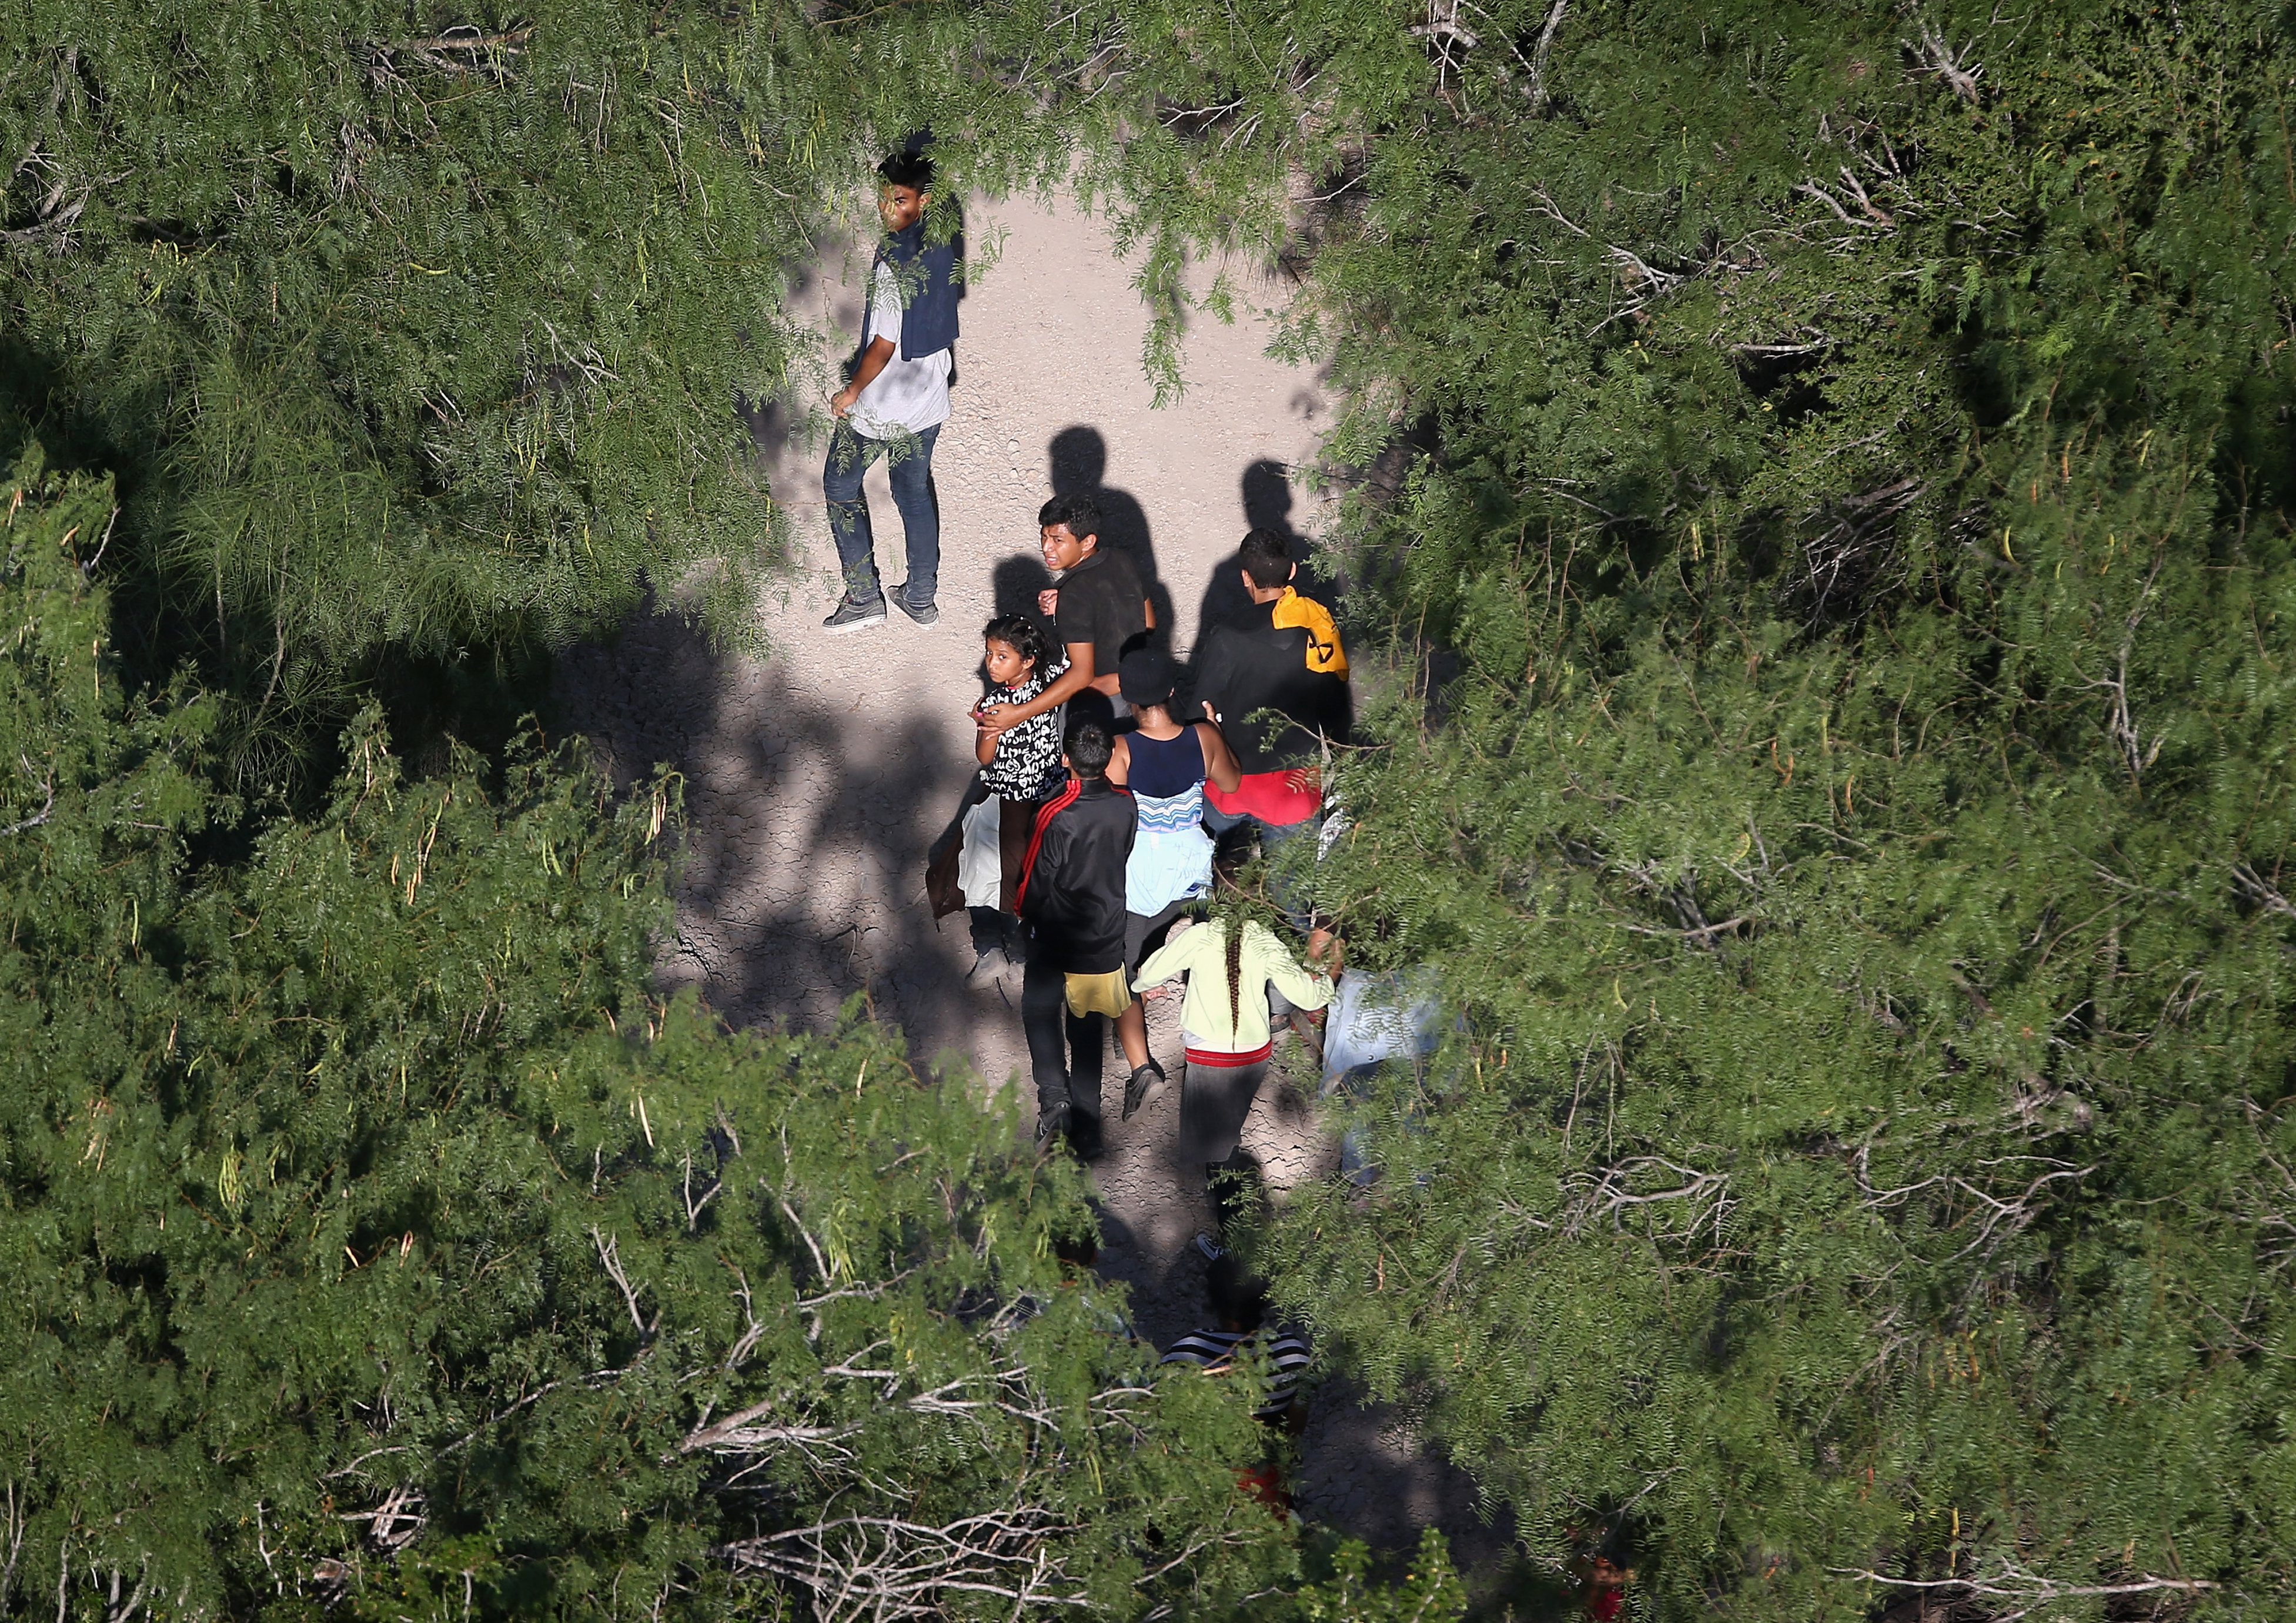 Undocumented immigrant families walk before being taken into custody by Border Patrol agents near McAllen, Texas on July 21, 2014. (John Moore—Getty Images)